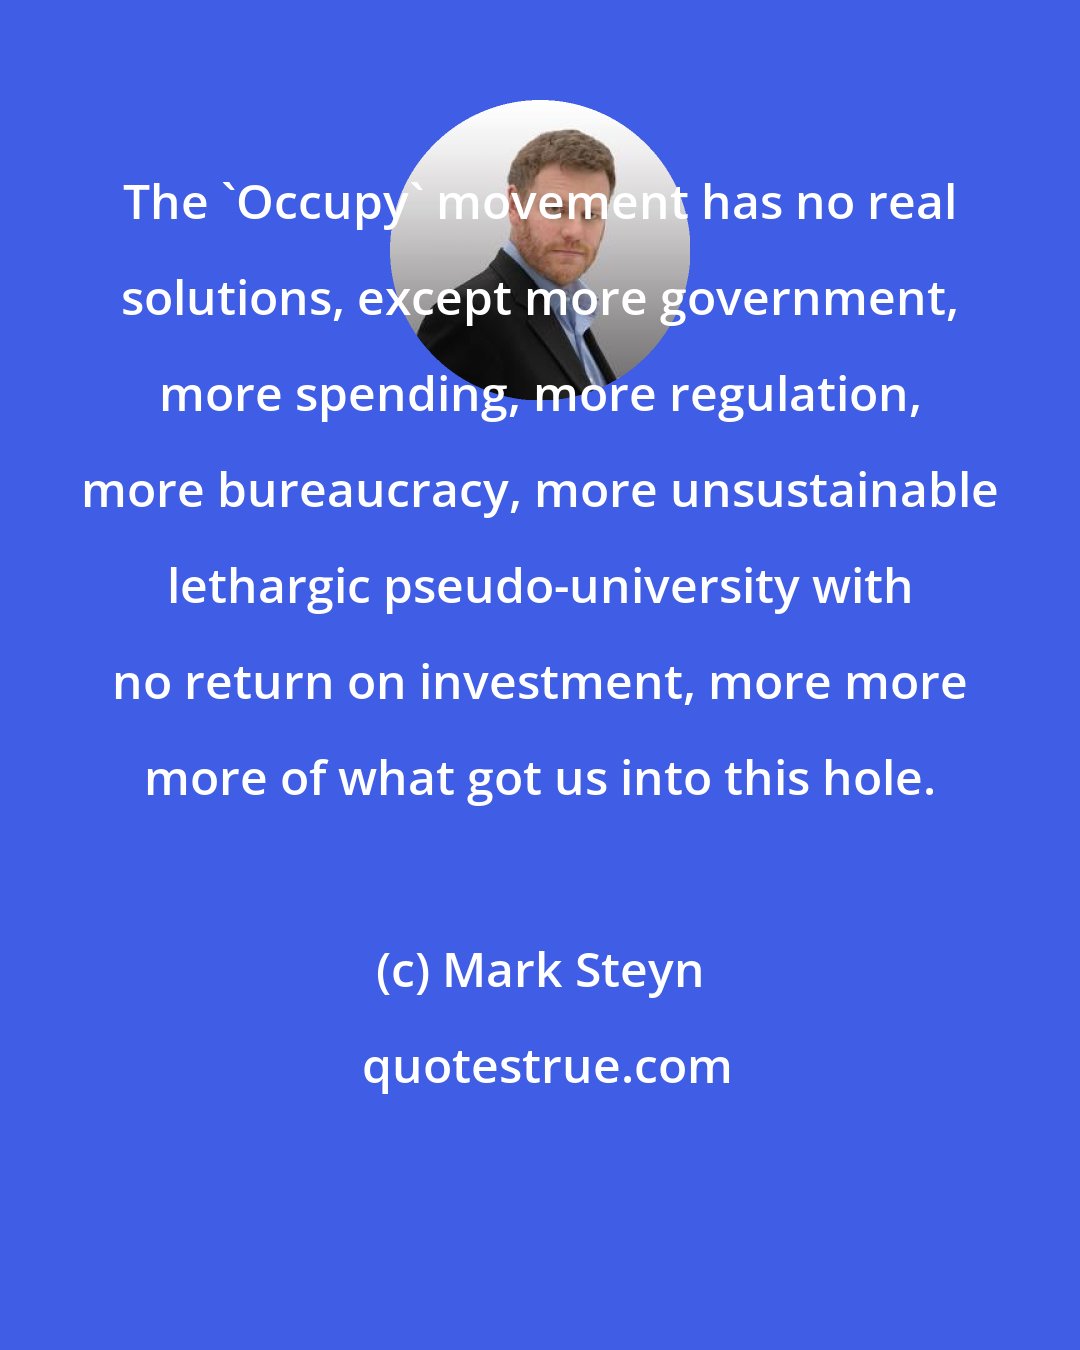 Mark Steyn: The 'Occupy' movement has no real solutions, except more government, more spending, more regulation, more bureaucracy, more unsustainable lethargic pseudo-university with no return on investment, more more more of what got us into this hole.